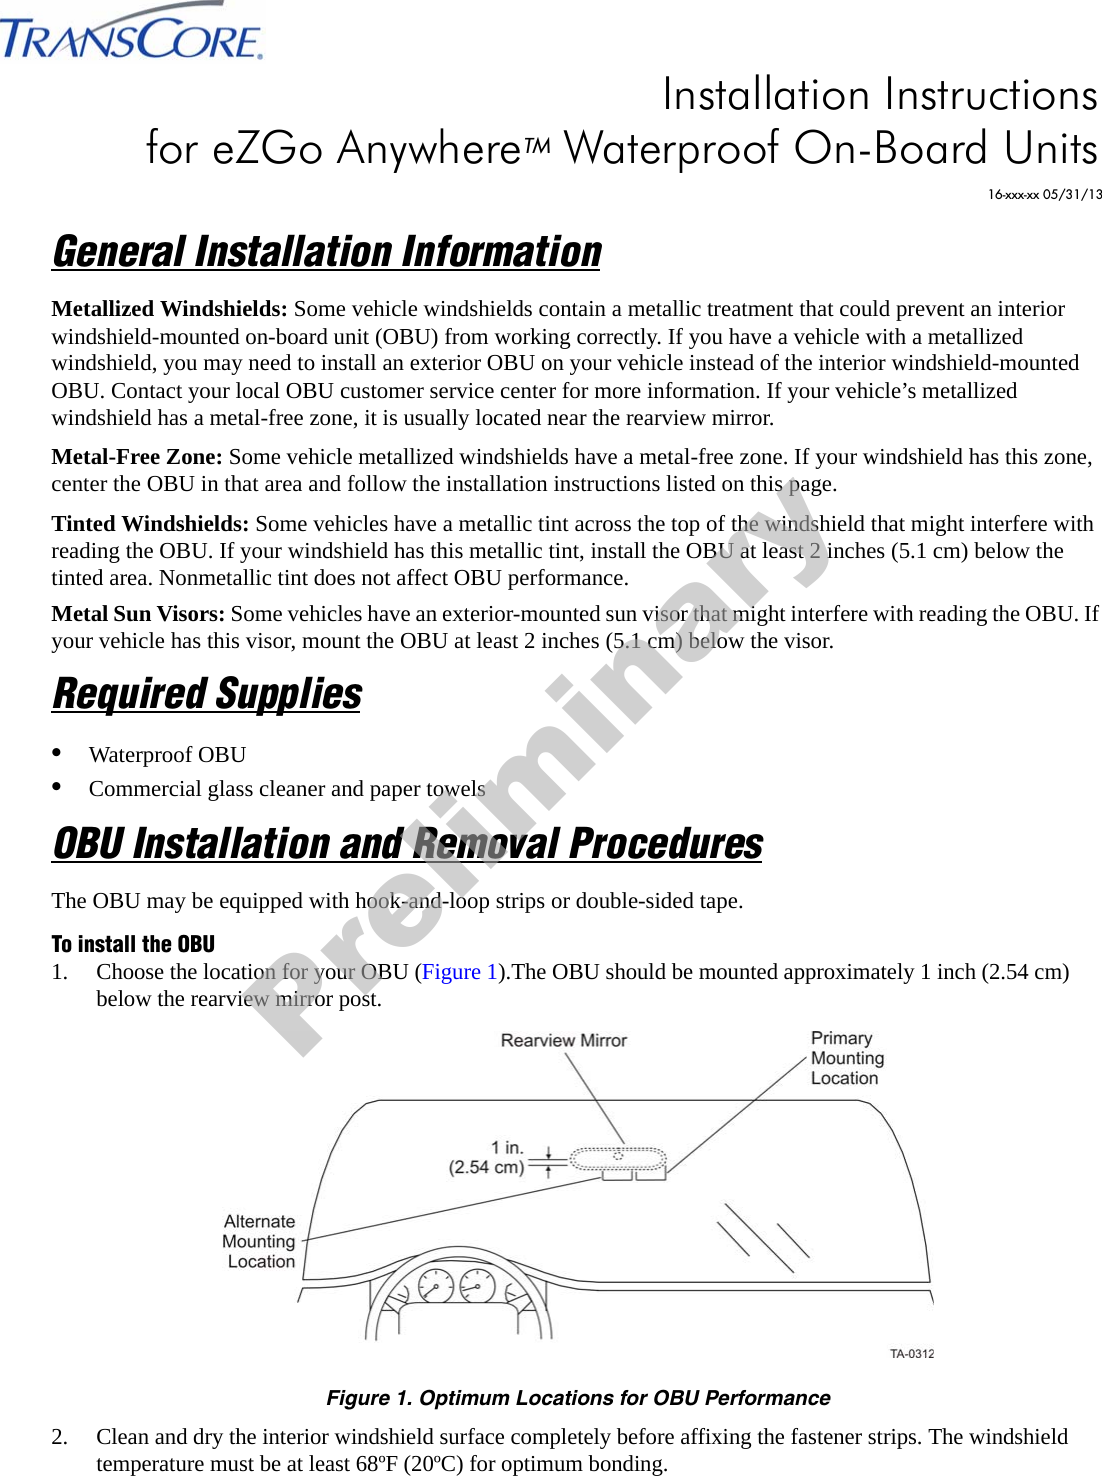 General Installation InformationMetallized Windshields: Some vehicle windshields contain a metallic treatment that could prevent an interior windshield-mounted on-board unit (OBU) from working correctly. If you have a vehicle with a metallized windshield, you may need to install an exterior OBU on your vehicle instead of the interior windshield-mounted OBU. Contact your local OBU customer service center for more information. If your vehicle’s metallized windshield has a metal-free zone, it is usually located near the rearview mirror.Metal-Free Zone: Some vehicle metallized windshields have a metal-free zone. If your windshield has this zone, center the OBU in that area and follow the installation instructions listed on this page.Tinted Windshields: Some vehicles have a metallic tint across the top of the windshield that might interfere with reading the OBU. If your windshield has this metallic tint, install the OBU at least 2 inches (5.1 cm) below the tinted area. Nonmetallic tint does not affect OBU performance.Metal Sun Visors: Some vehicles have an exterior-mounted sun visor that might interfere with reading the OBU. If your vehicle has this visor, mount the OBU at least 2 inches (5.1 cm) below the visor.Required Supplies•Waterproof OBU•Commercial glass cleaner and paper towelsOBU Installation and Removal ProceduresThe OBU may be equipped with hook-and-loop strips or double-sided tape.To install the OBU1. Choose the location for your OBU (Figure 1).The OBU should be mounted approximately 1 inch (2.54 cm) below the rearview mirror post.Figure 1. Optimum Locations for OBU Performance2. Clean and dry the interior windshield surface completely before affixing the fastener strips. The windshield temperature must be at least 68ºF (20ºC) for optimum bonding.Installation Instructions for eZGo AnywhereTM Waterproof On-Board Units16-xxx-xx 05/31/13Preliminary